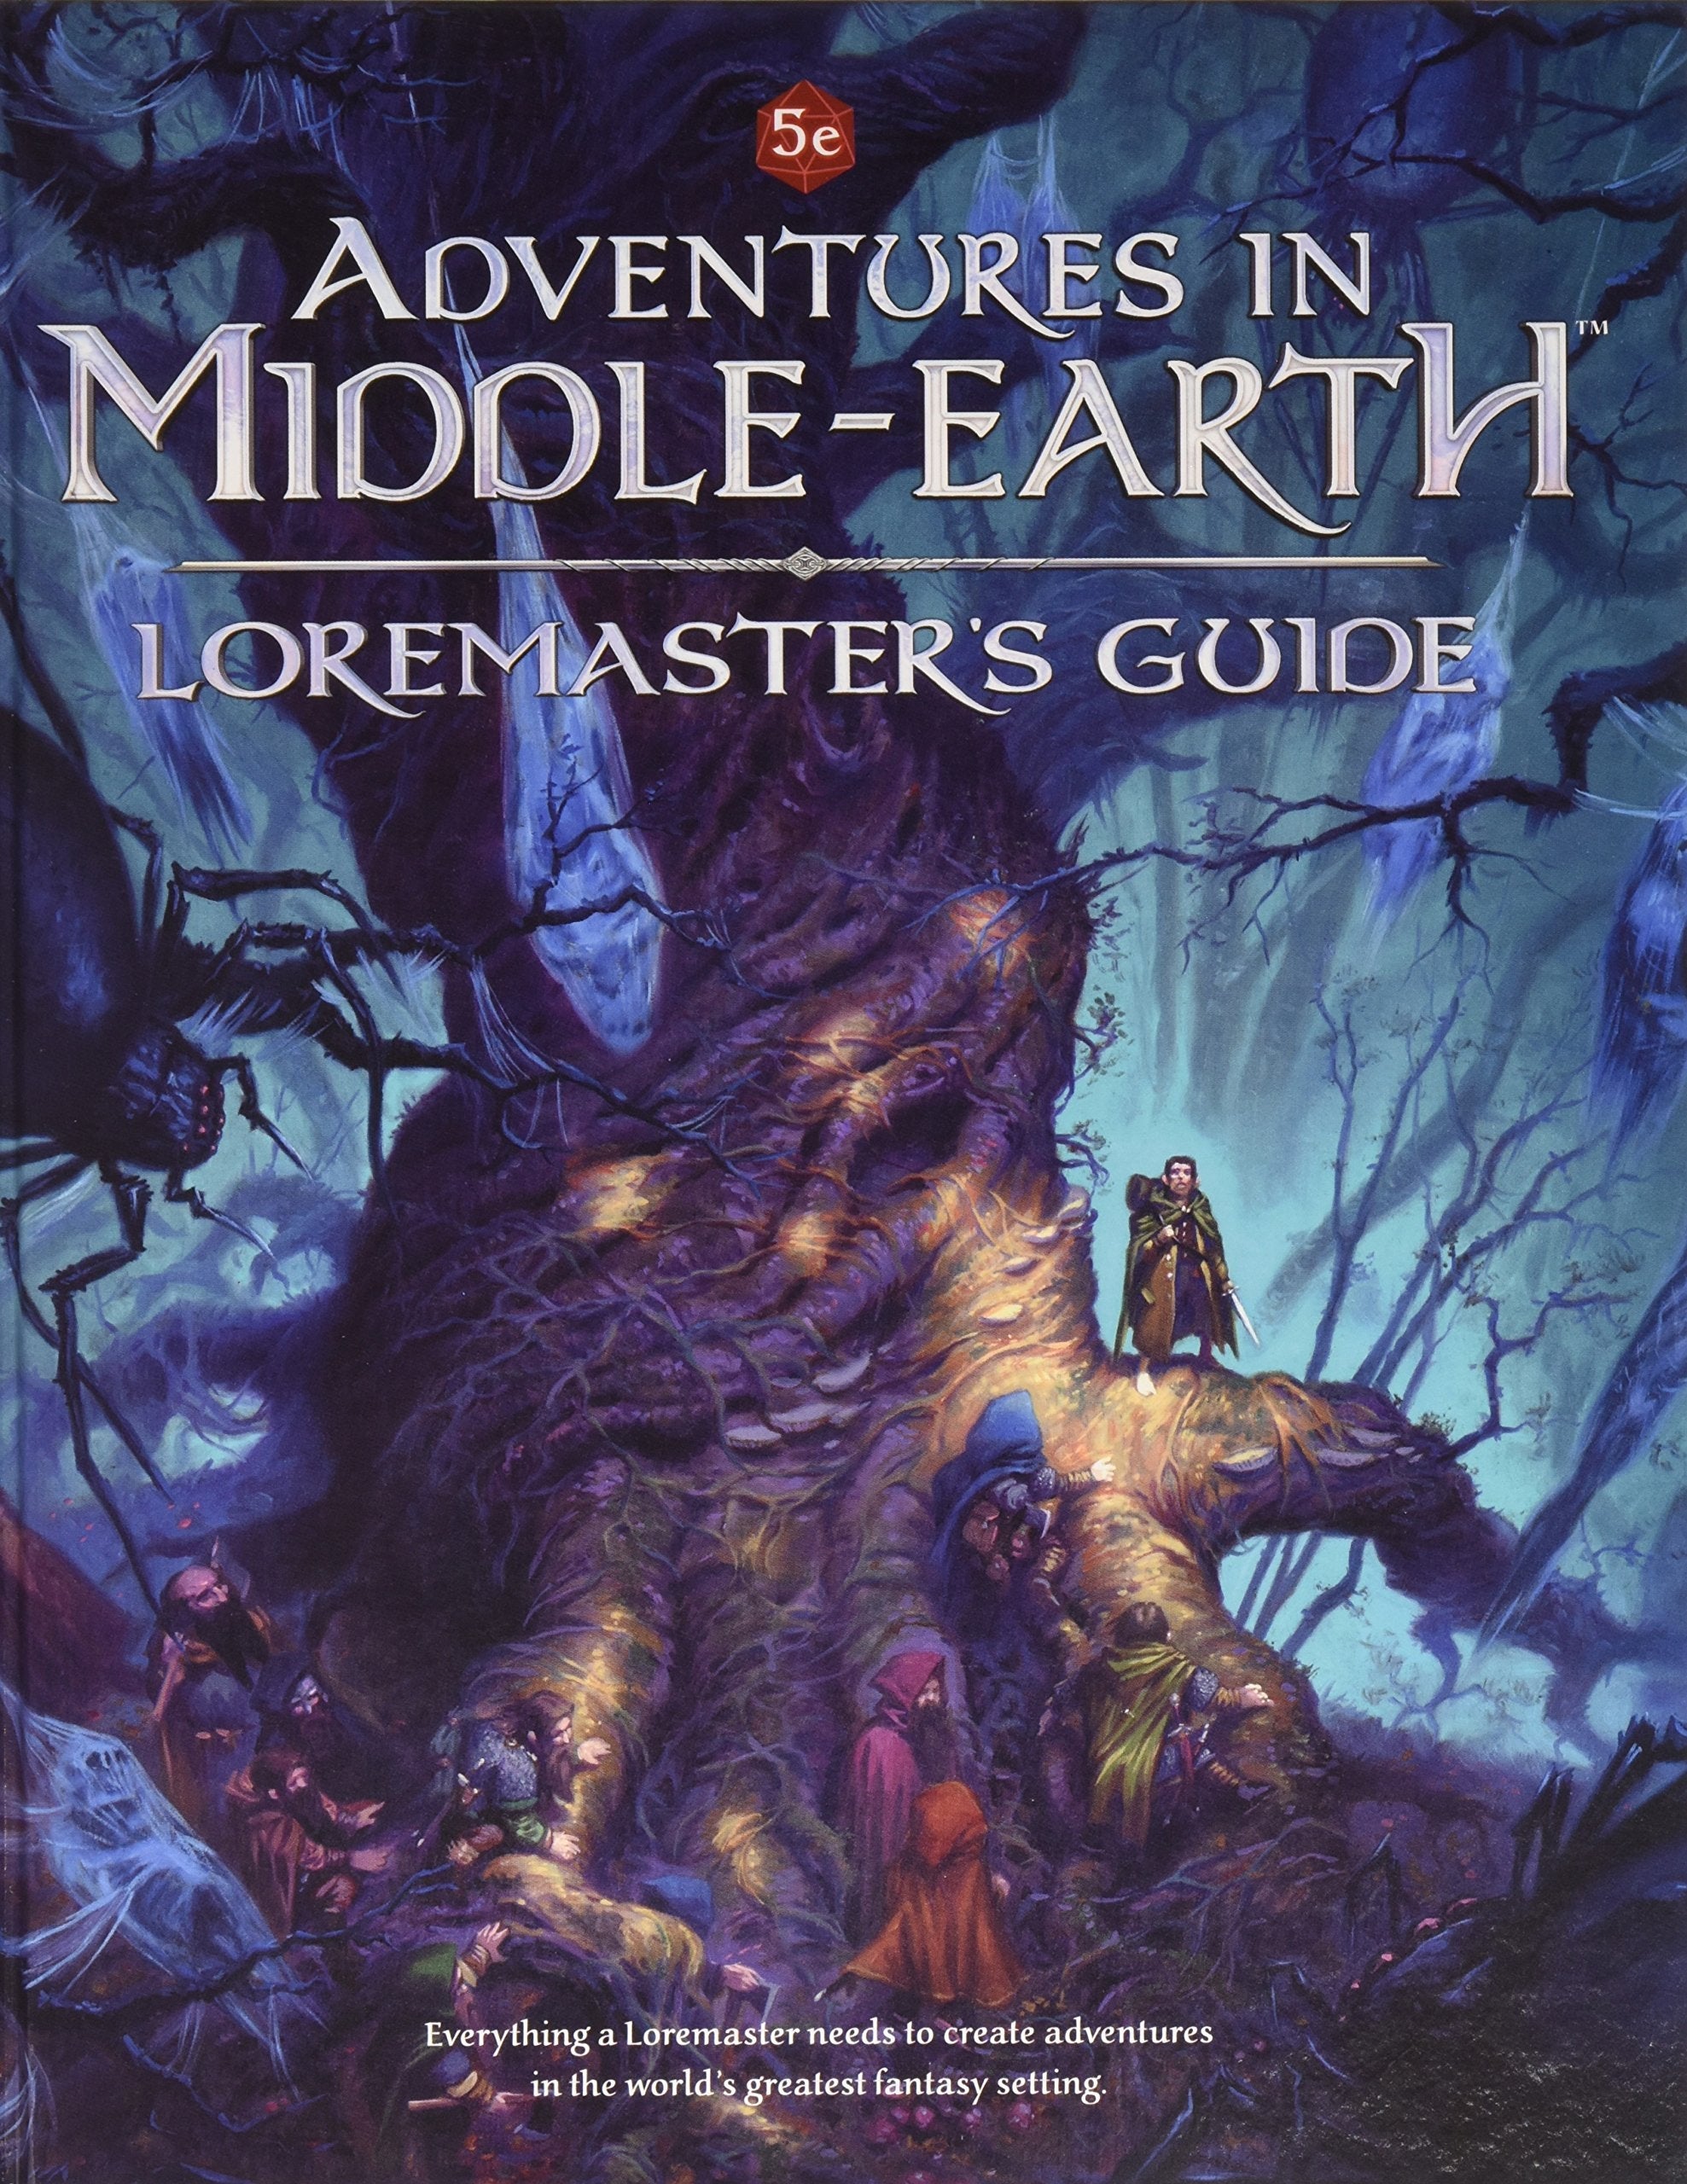 Loremasters Guide - 5E: Adventures in Middle-Earth Guide